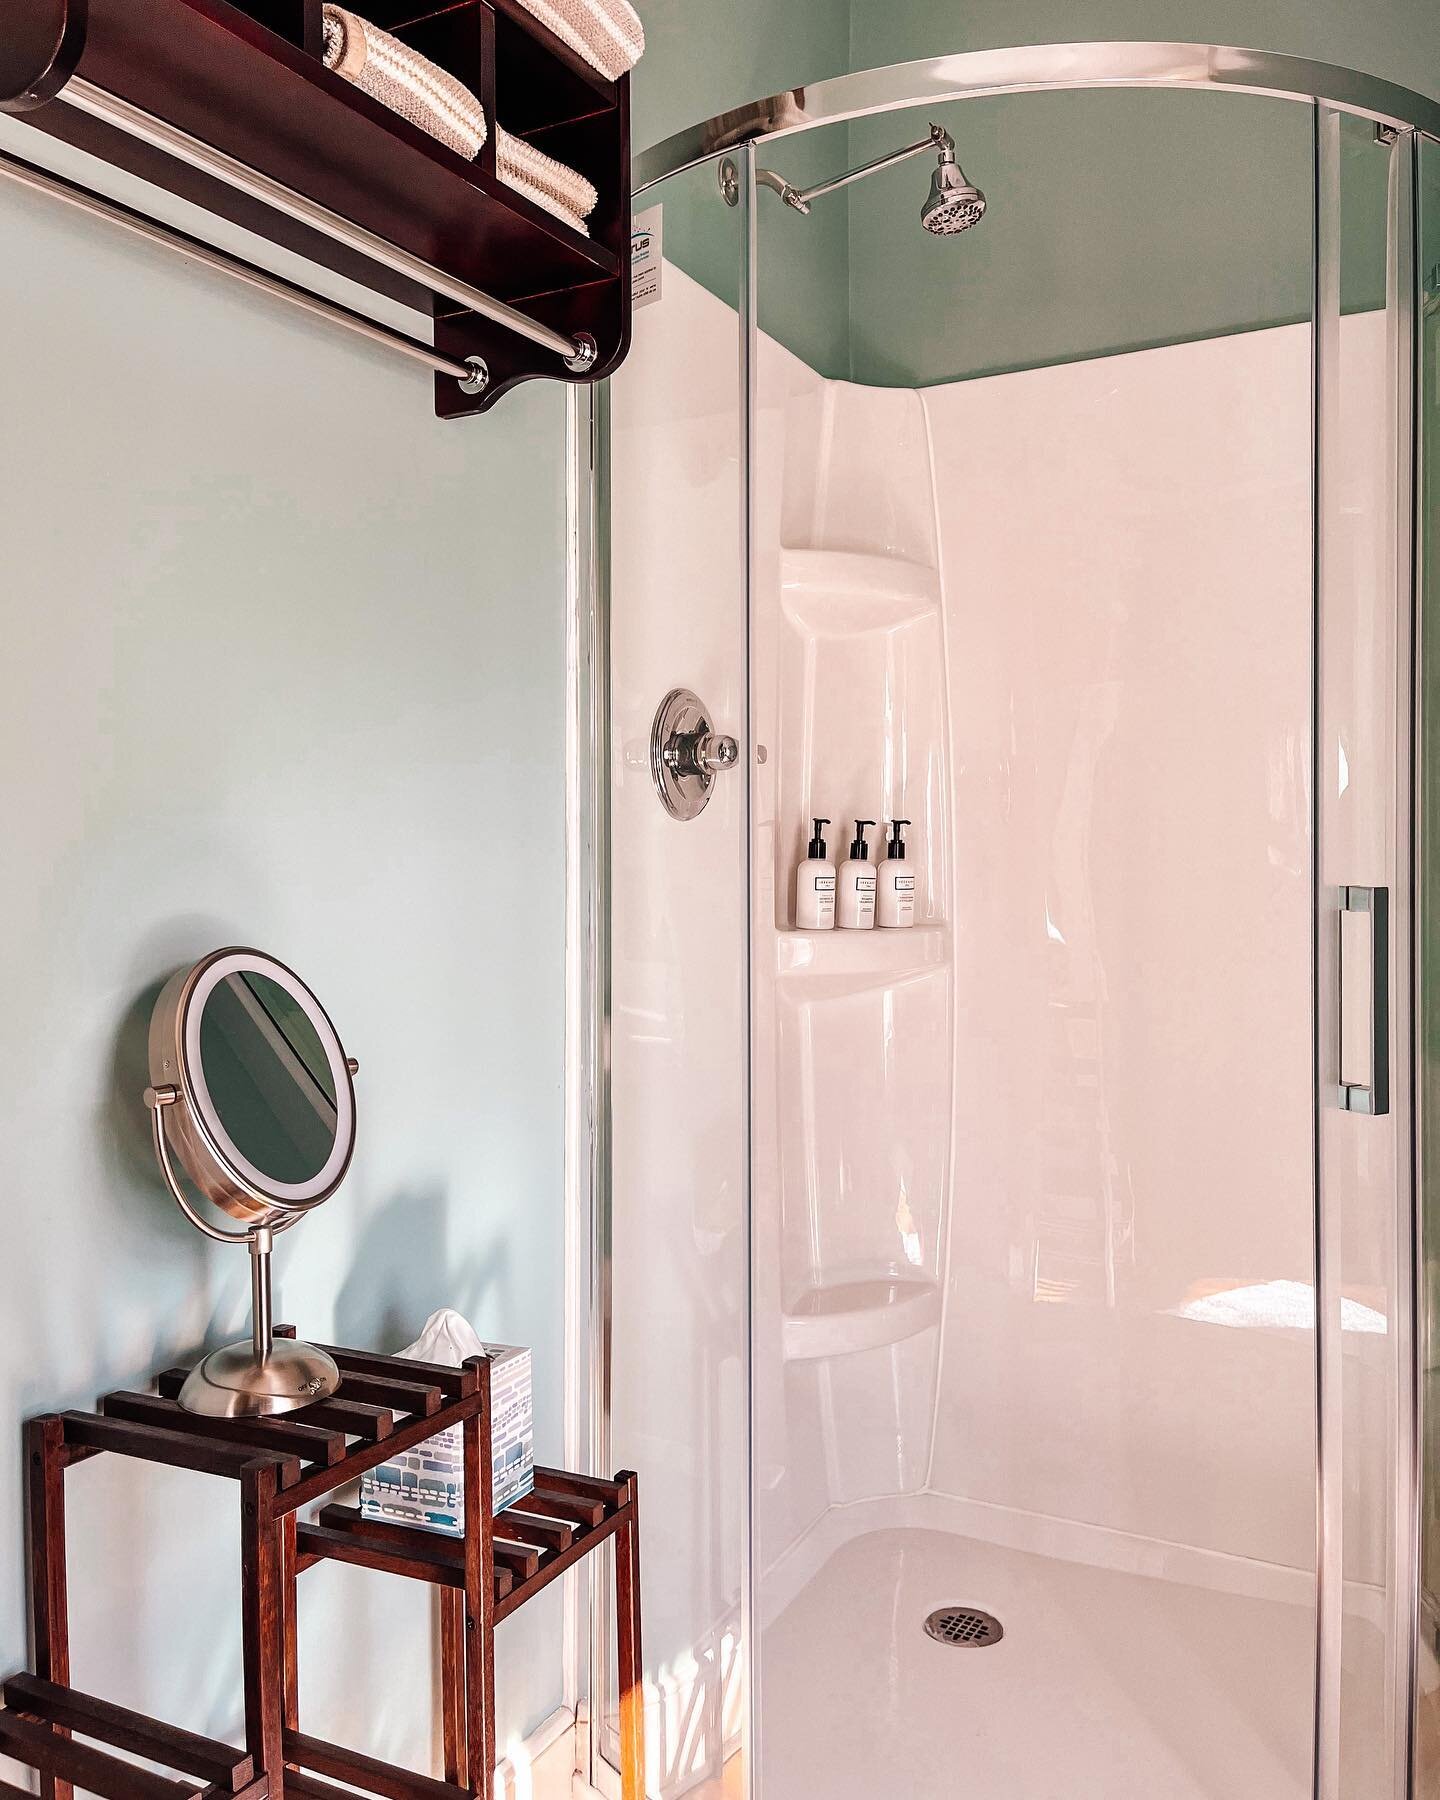 We&rsquo;re excited to announce that The O&rsquo;Connell House is now providing guests of the B&amp;B with @beekman1802 shower products!

As a high-quality amenity offered at luxury hotels all over the world, Beekman 1802&rsquo;s Fresh Air line is &l